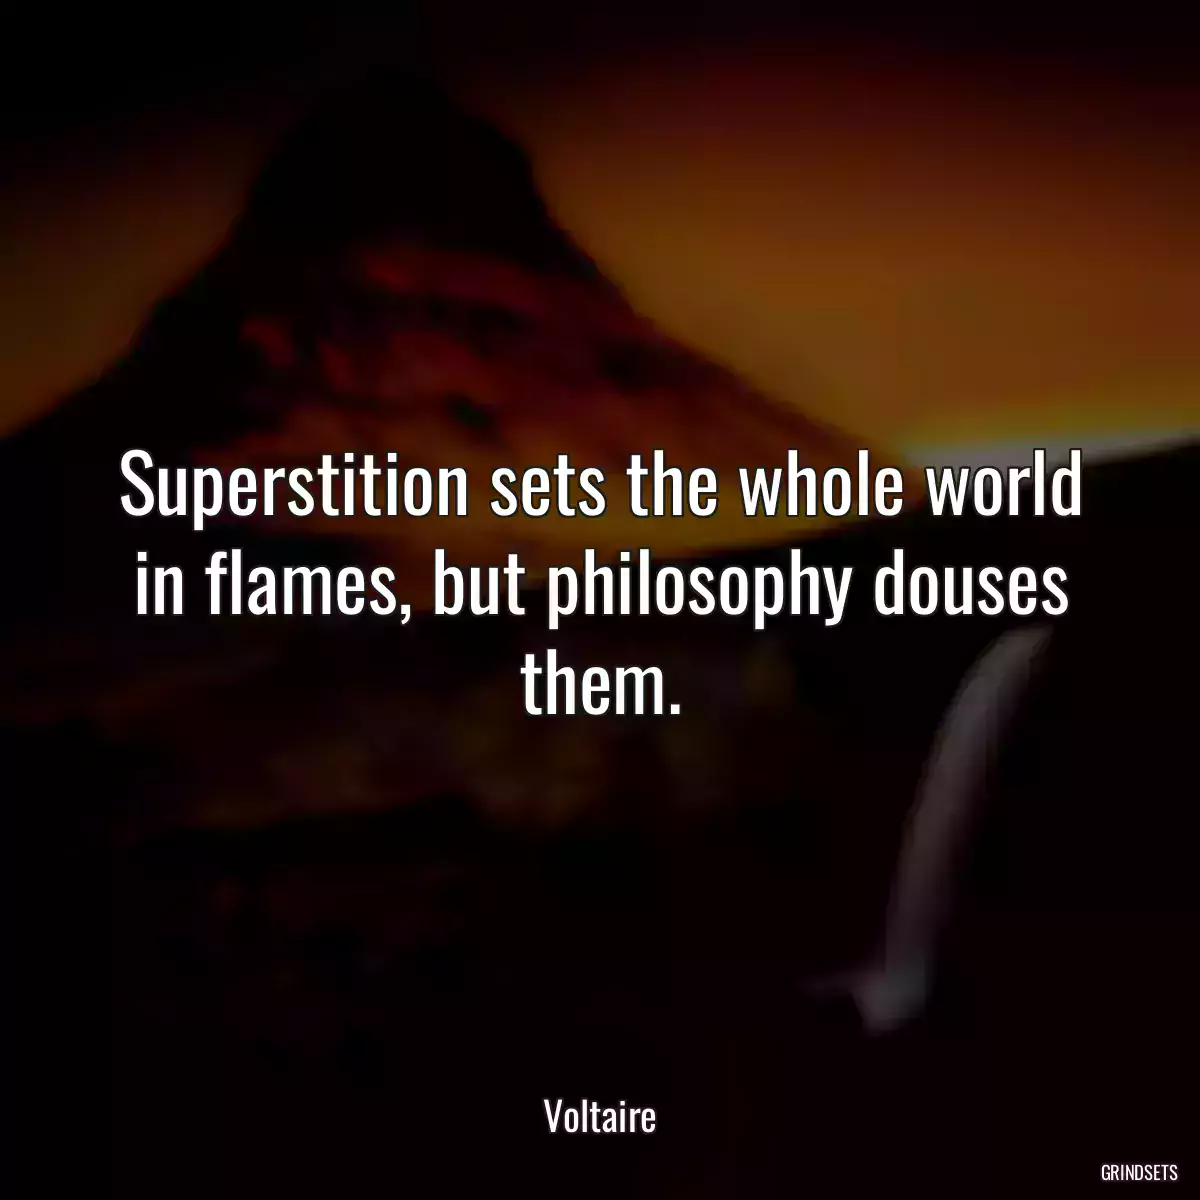 Superstition sets the whole world in flames, but philosophy douses them.